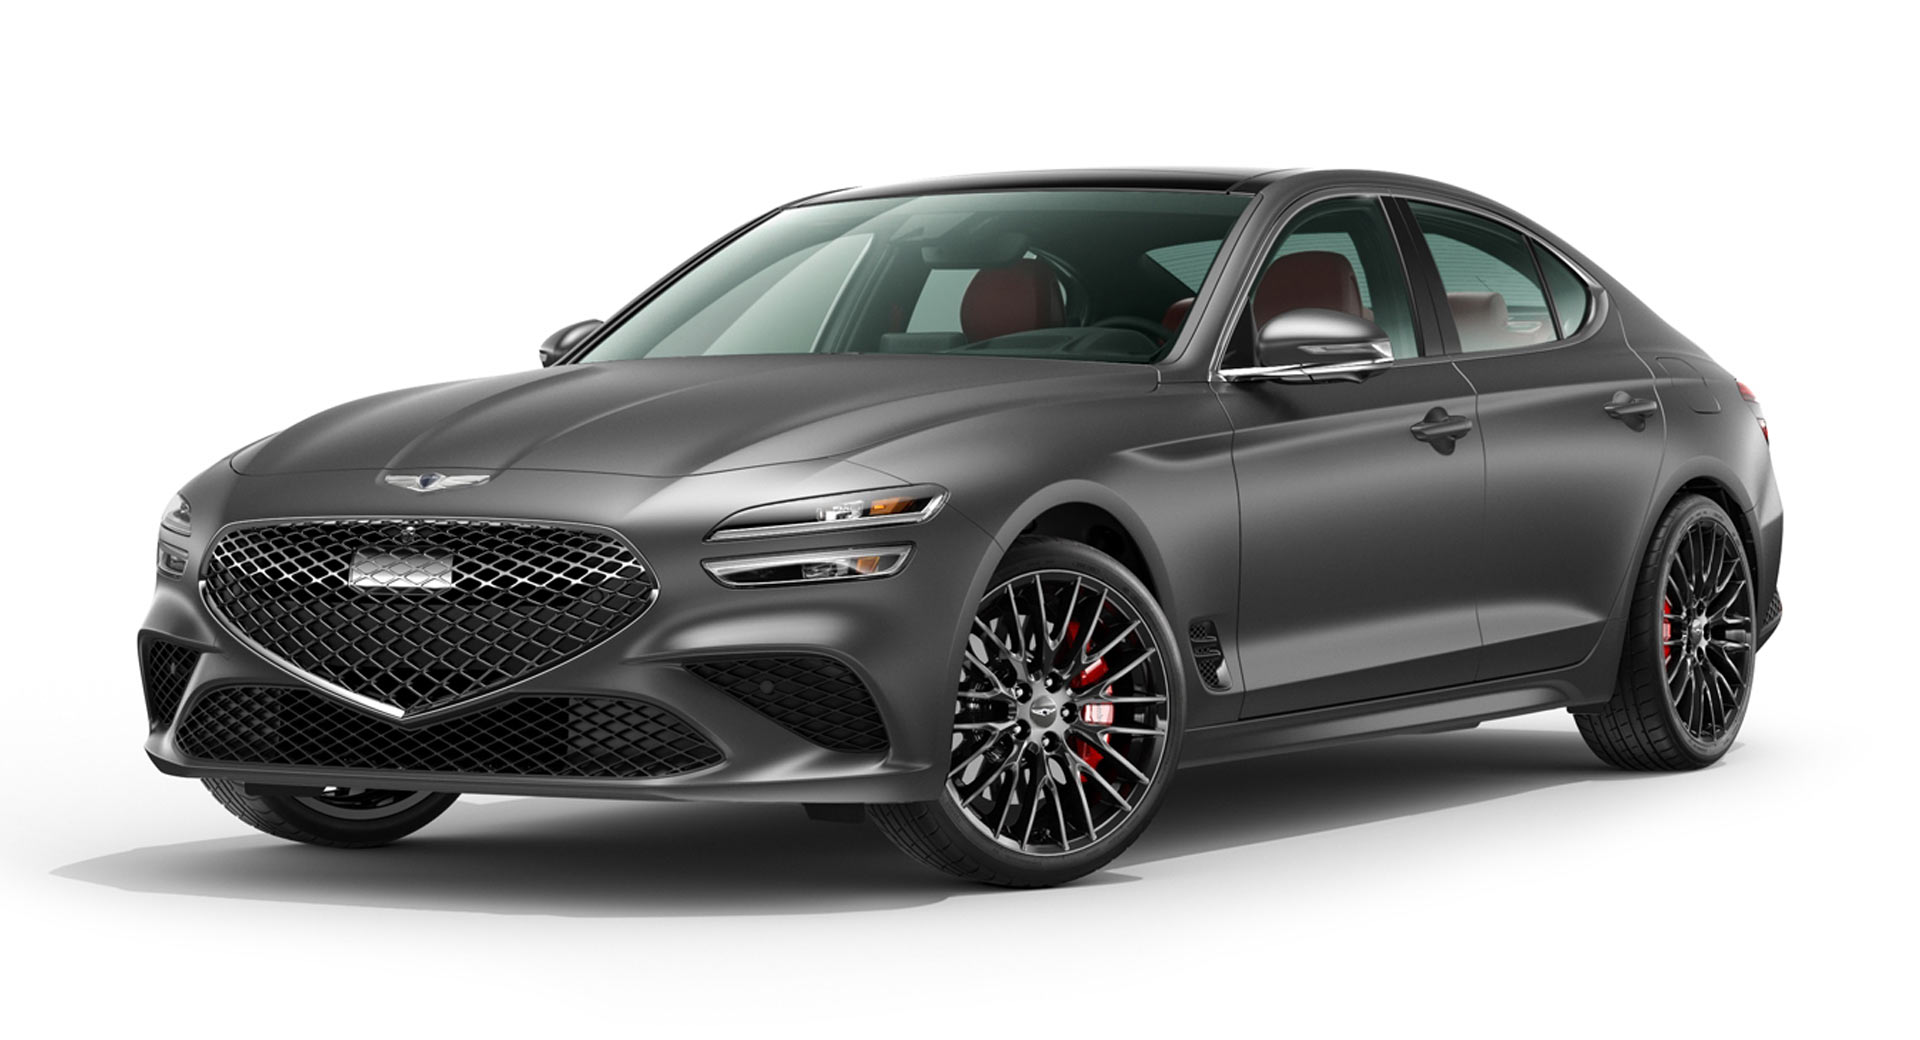 2022 Genesis G70 arrives in America this spring with a carpet launch